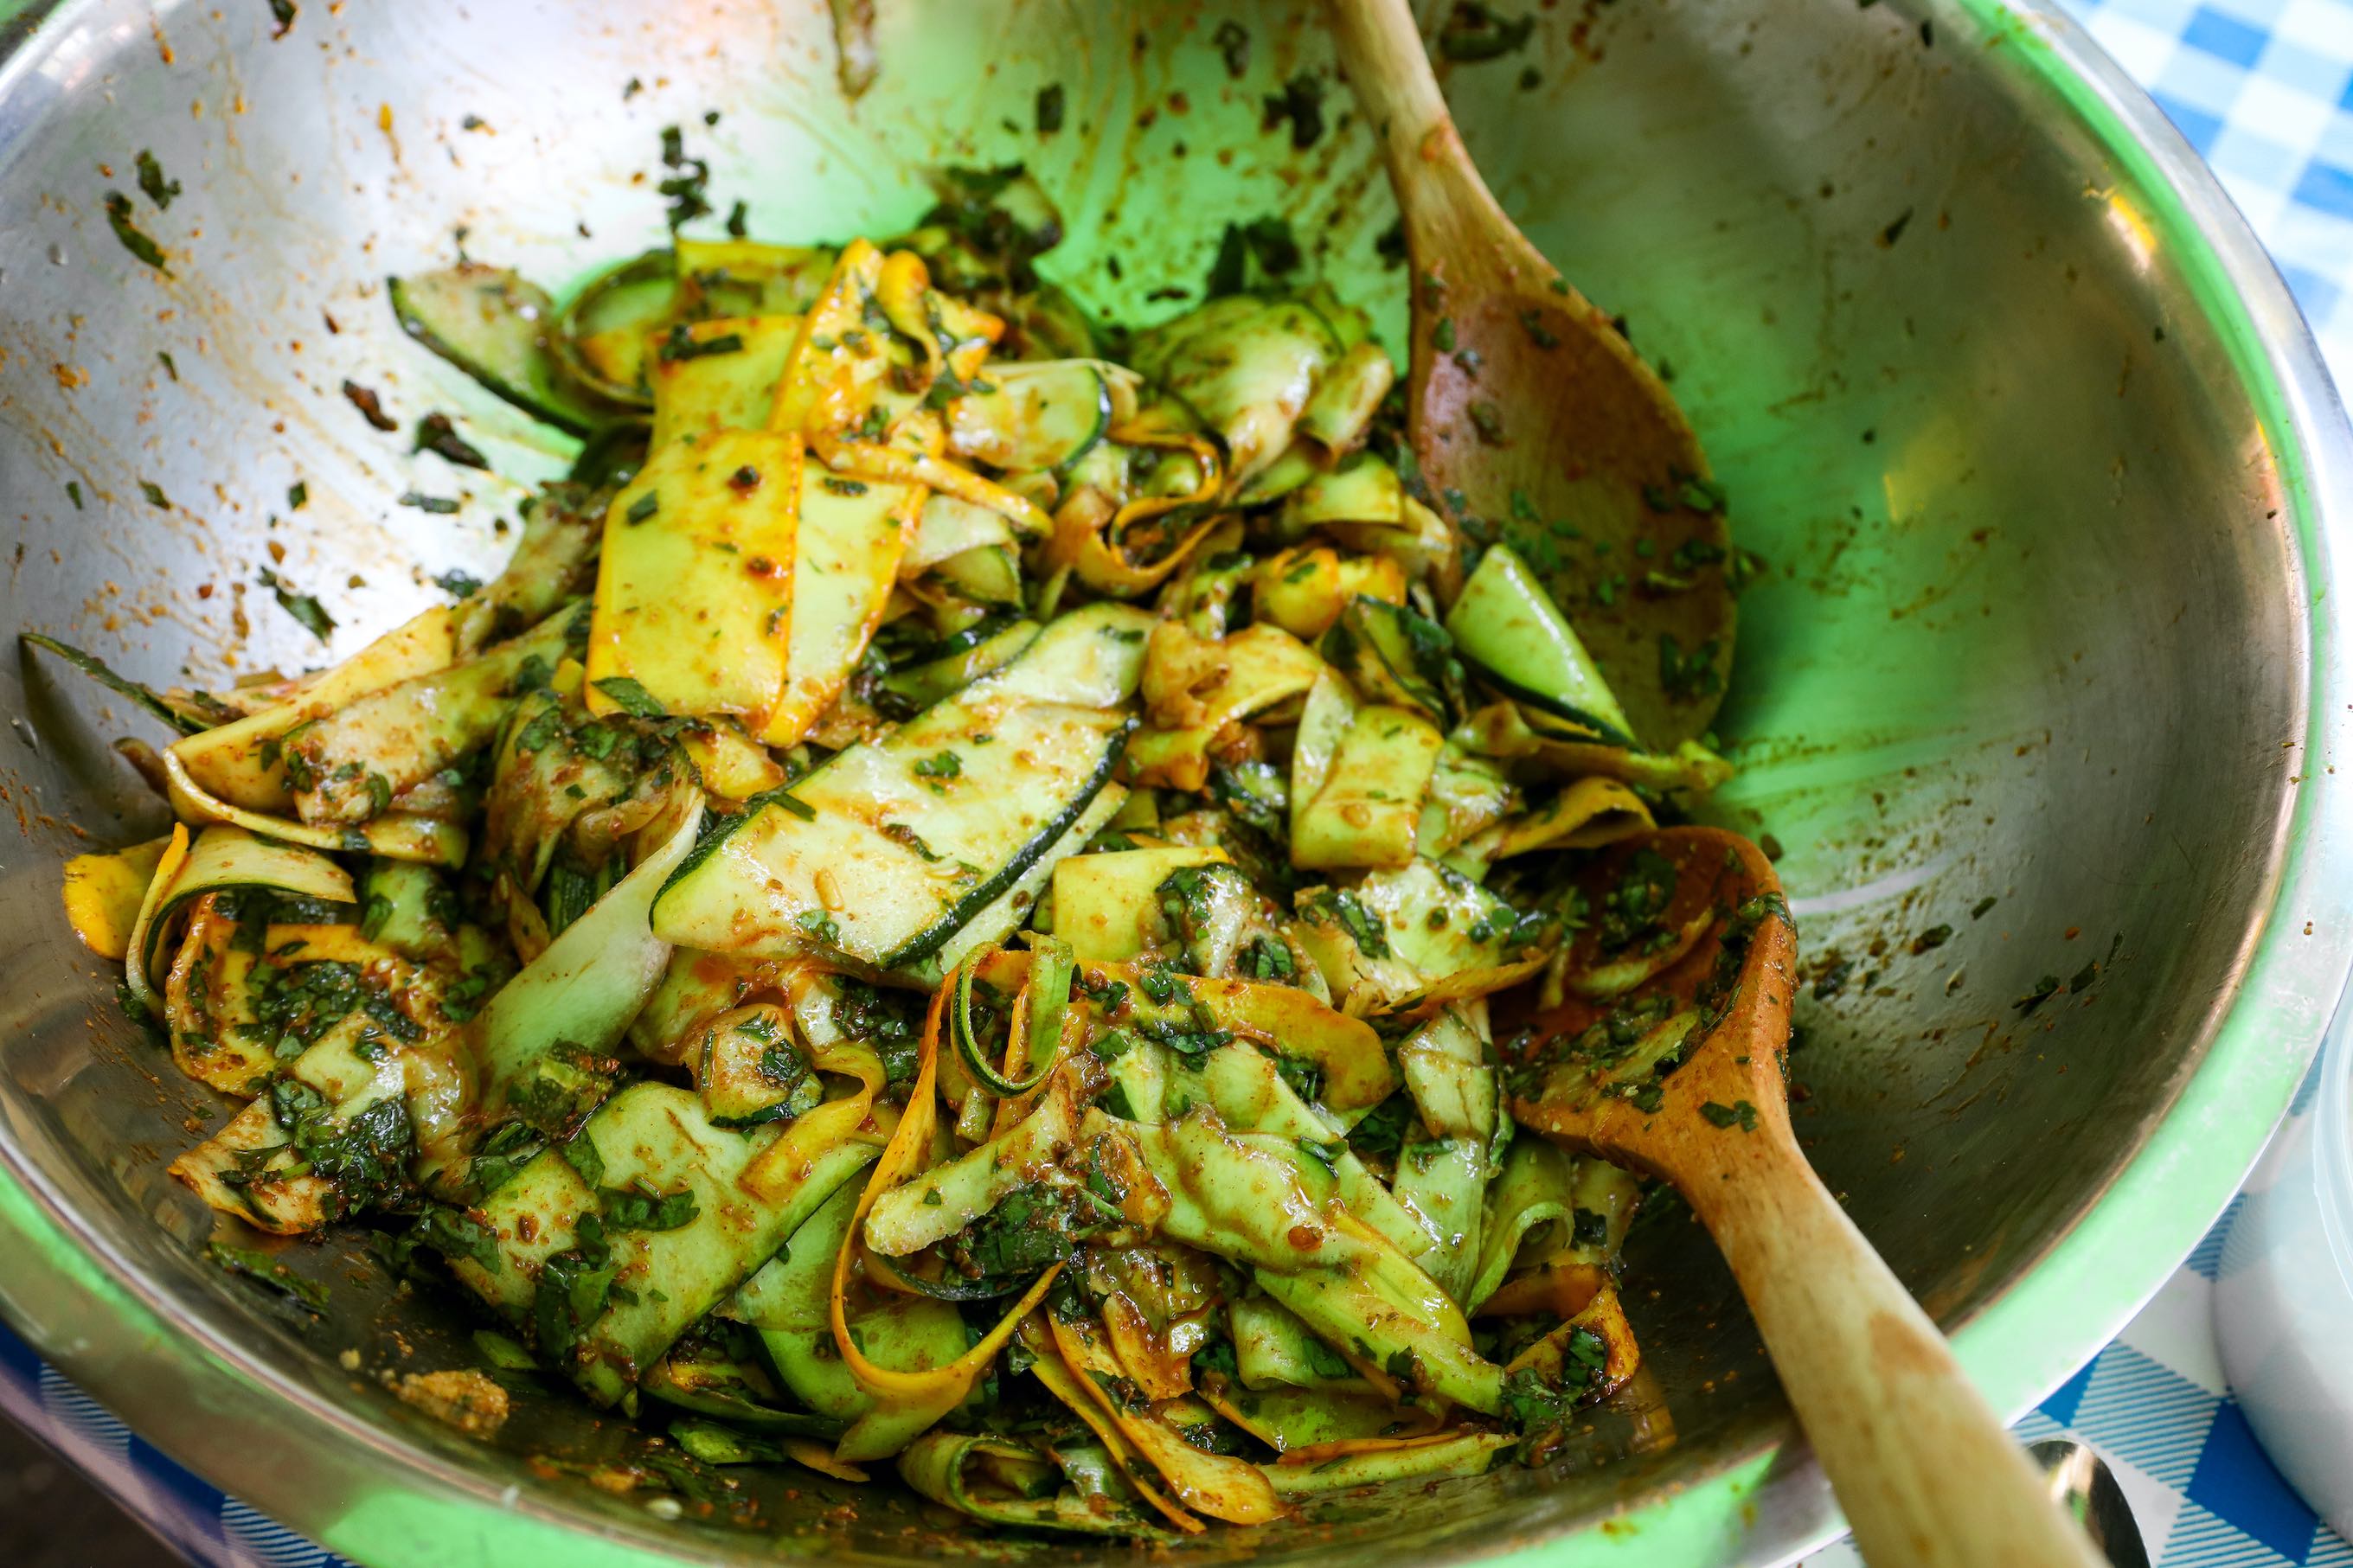 Summer squash noodles mixed with chermoula in metal bowl